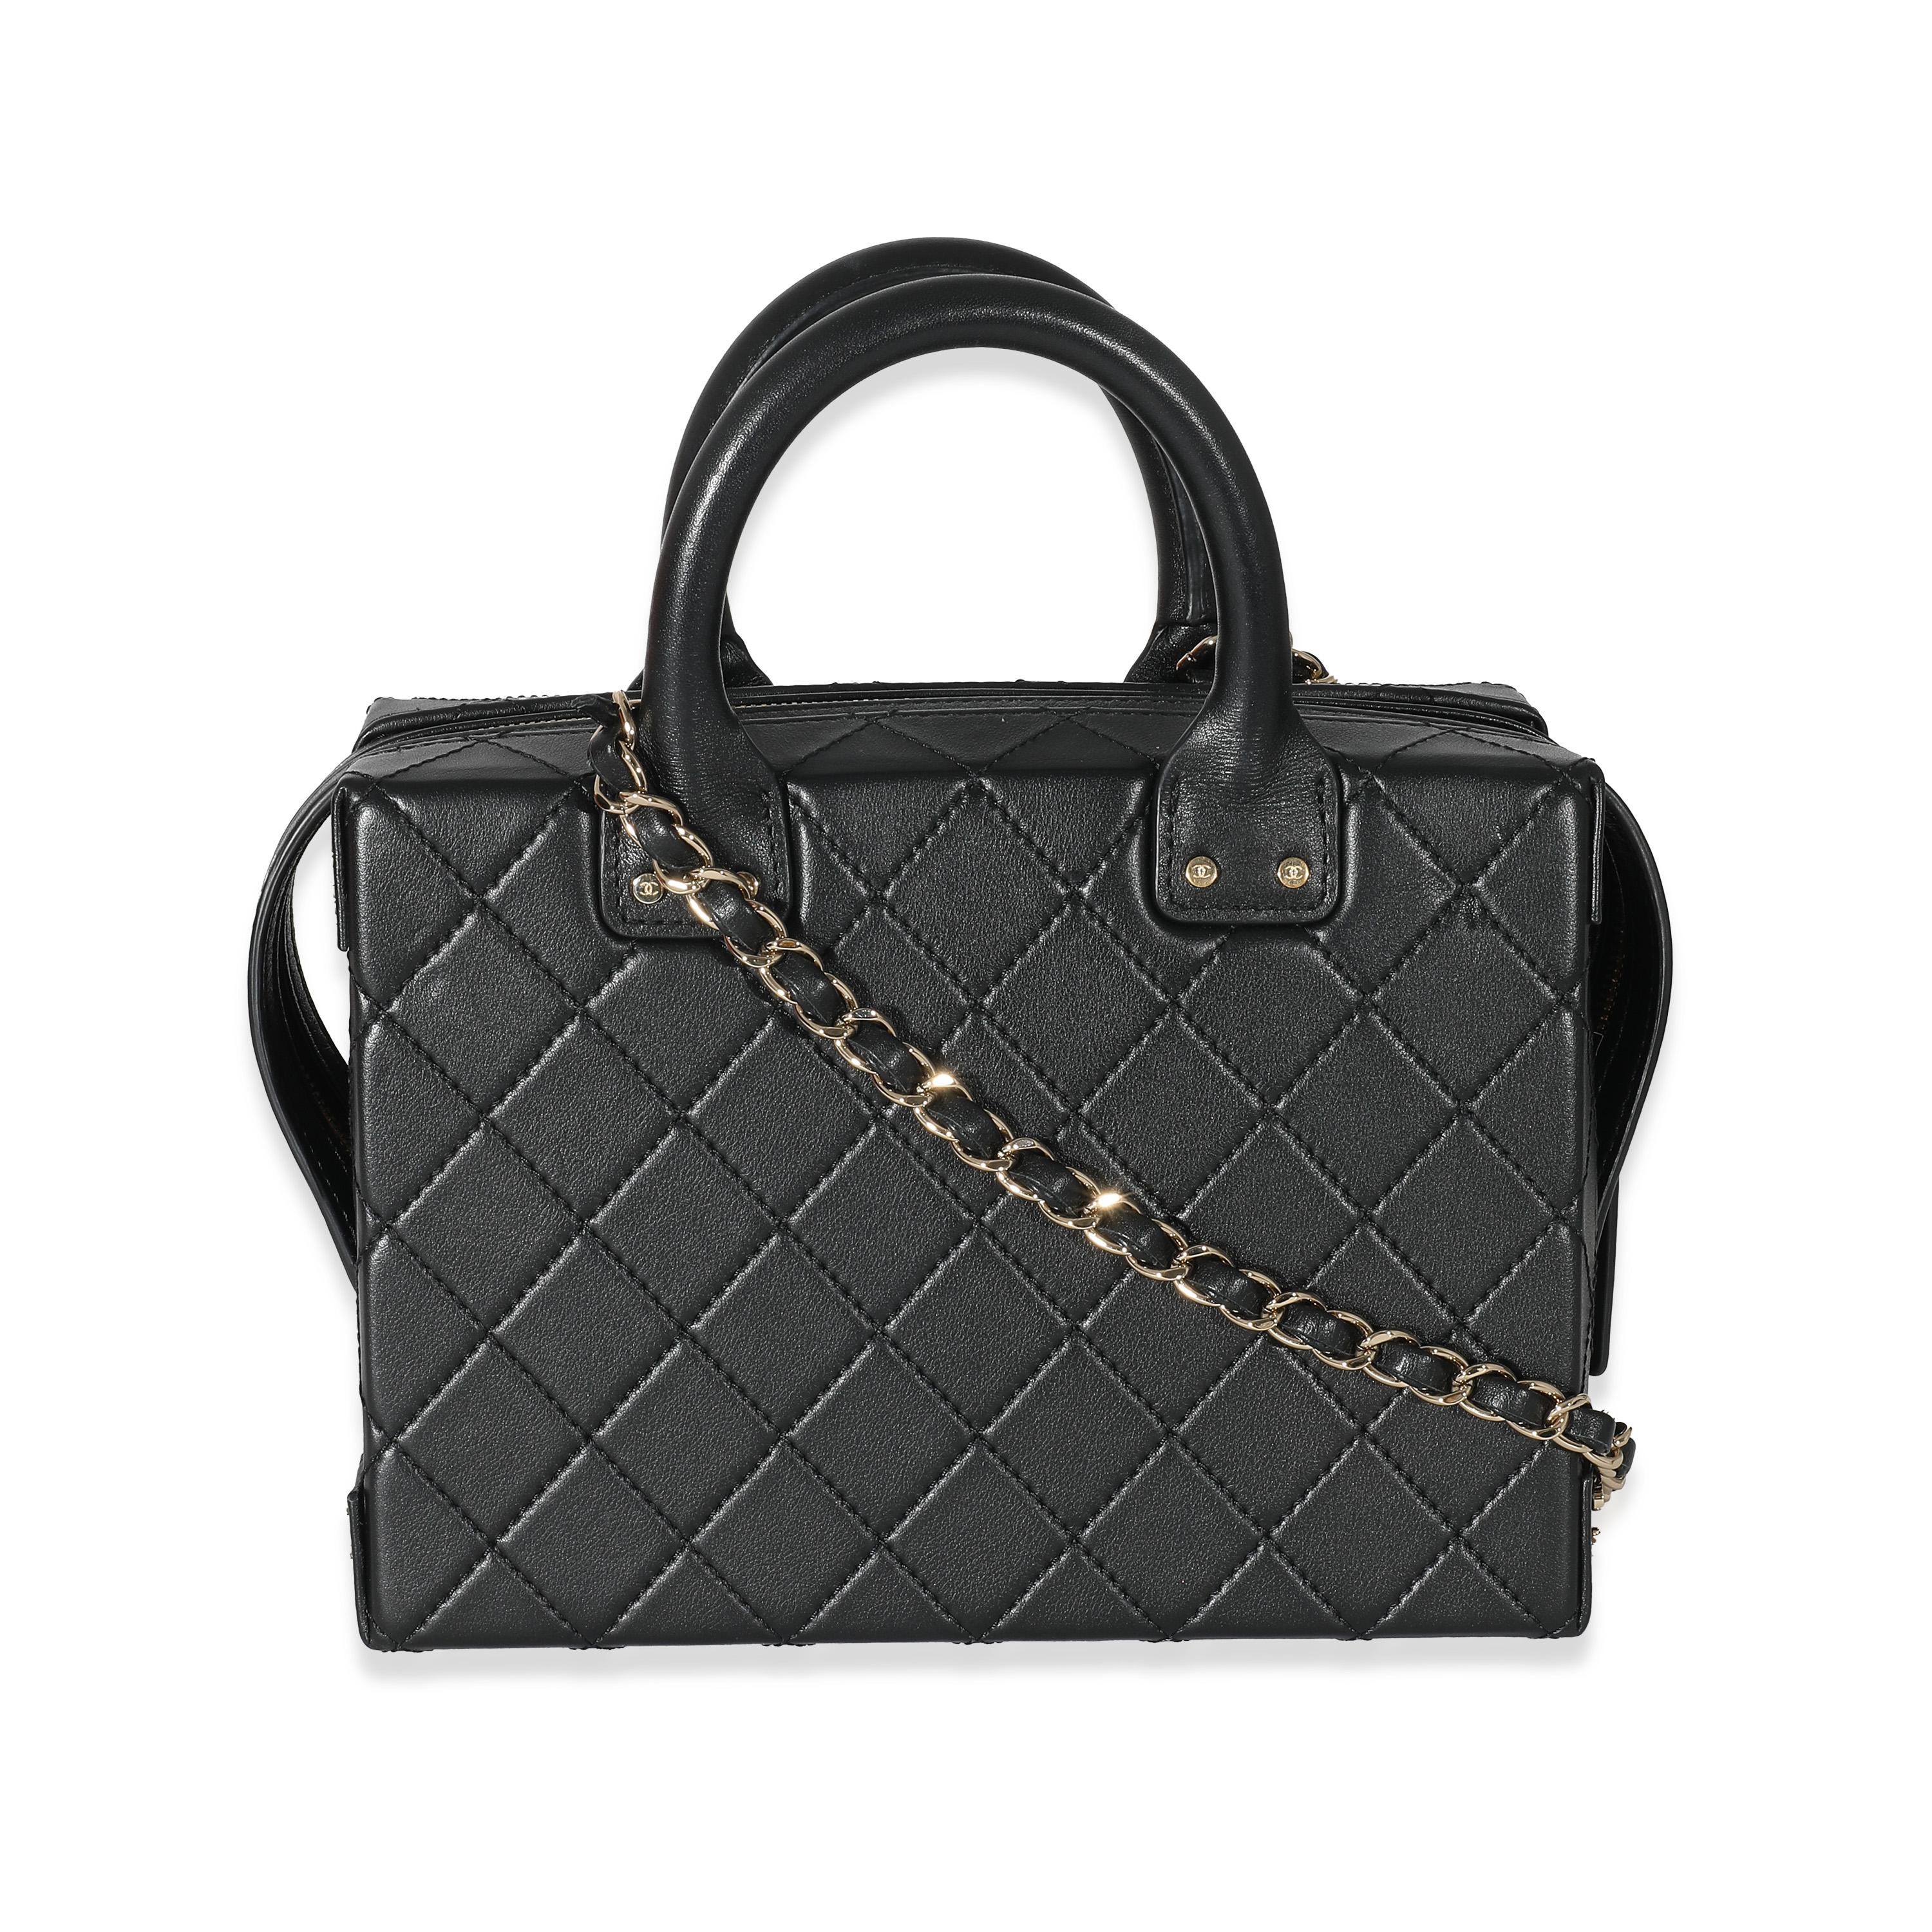 Listing Title: Chanel 22B Black Quilted Calfskin Vanity Case
SKU: 133793
Condition: Pre-owned 
Handbag Condition: Excellent
Condition Comments: Item is in excellent condition and displays light signs of wear. Missing zipper pull. Exterior corner